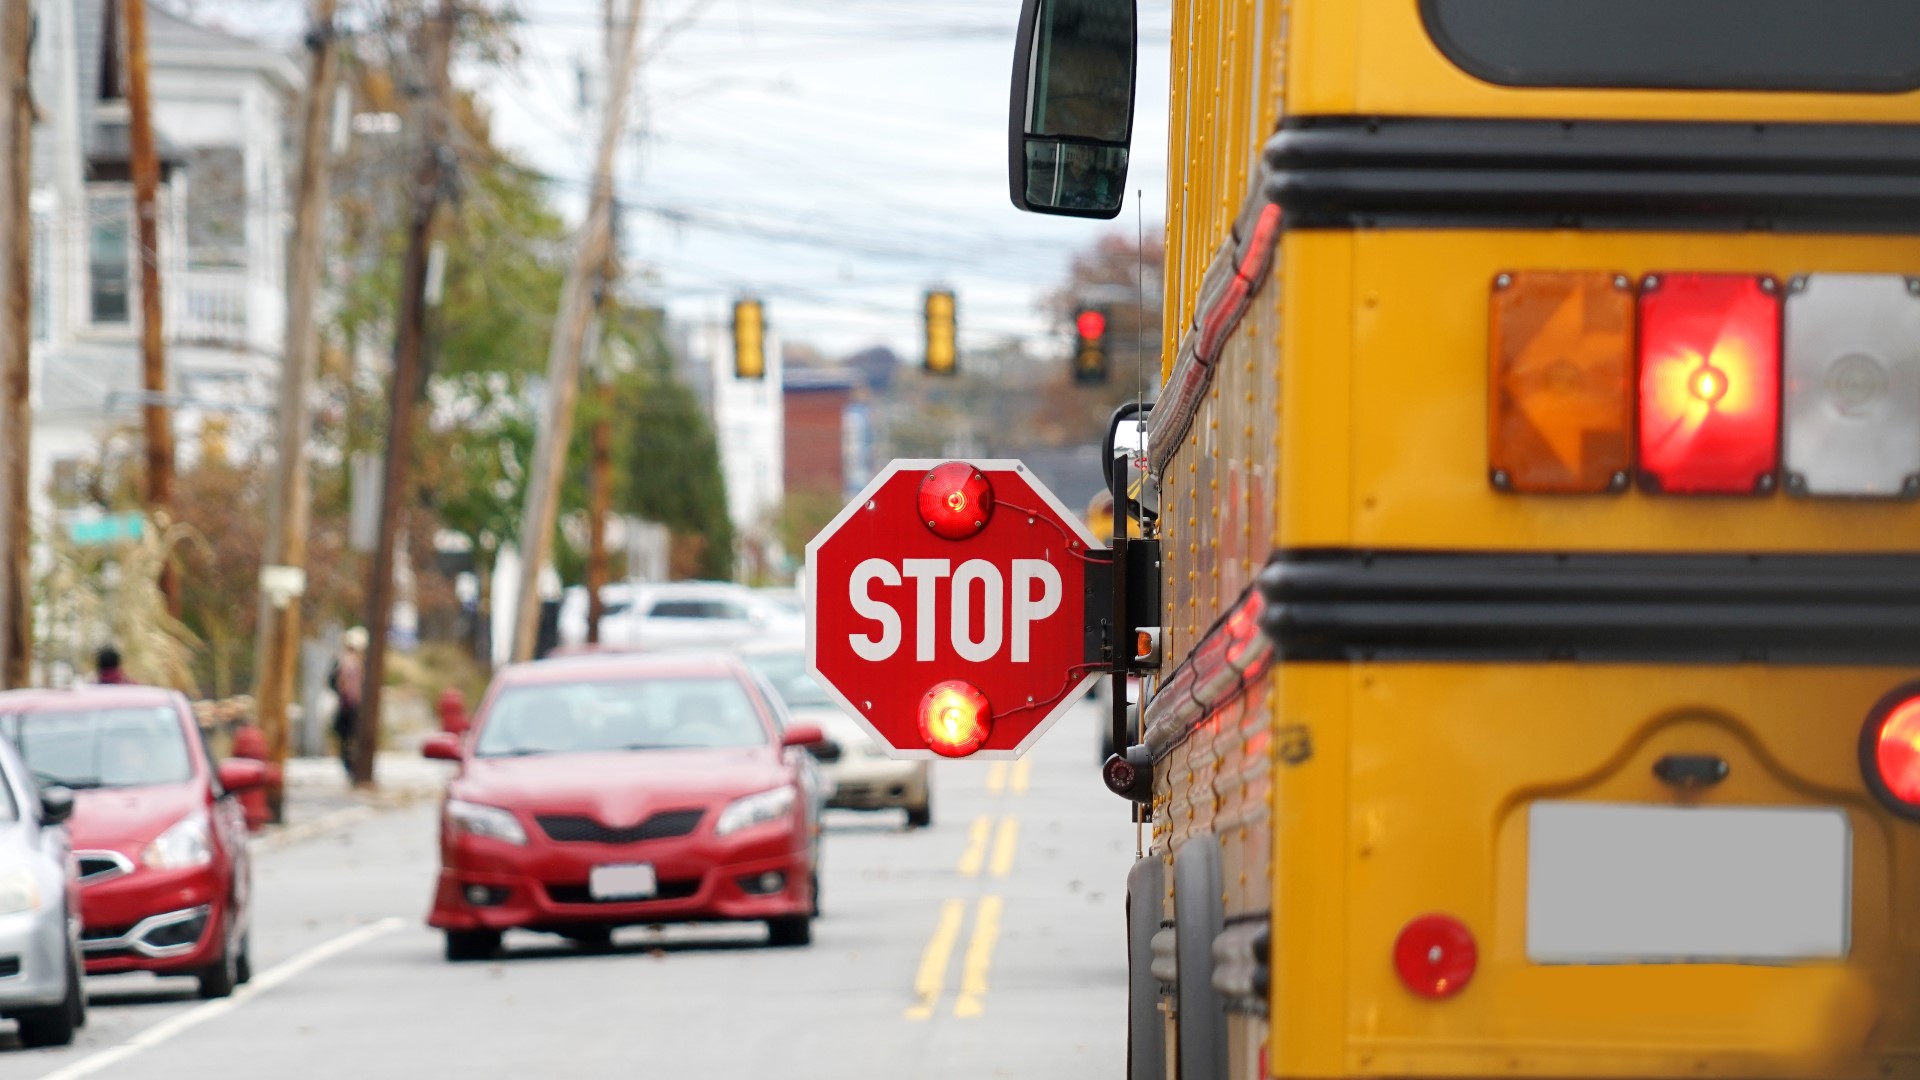 More traffic and school busses are on the road in 2021 as students return to the classroom after a year working remotely.